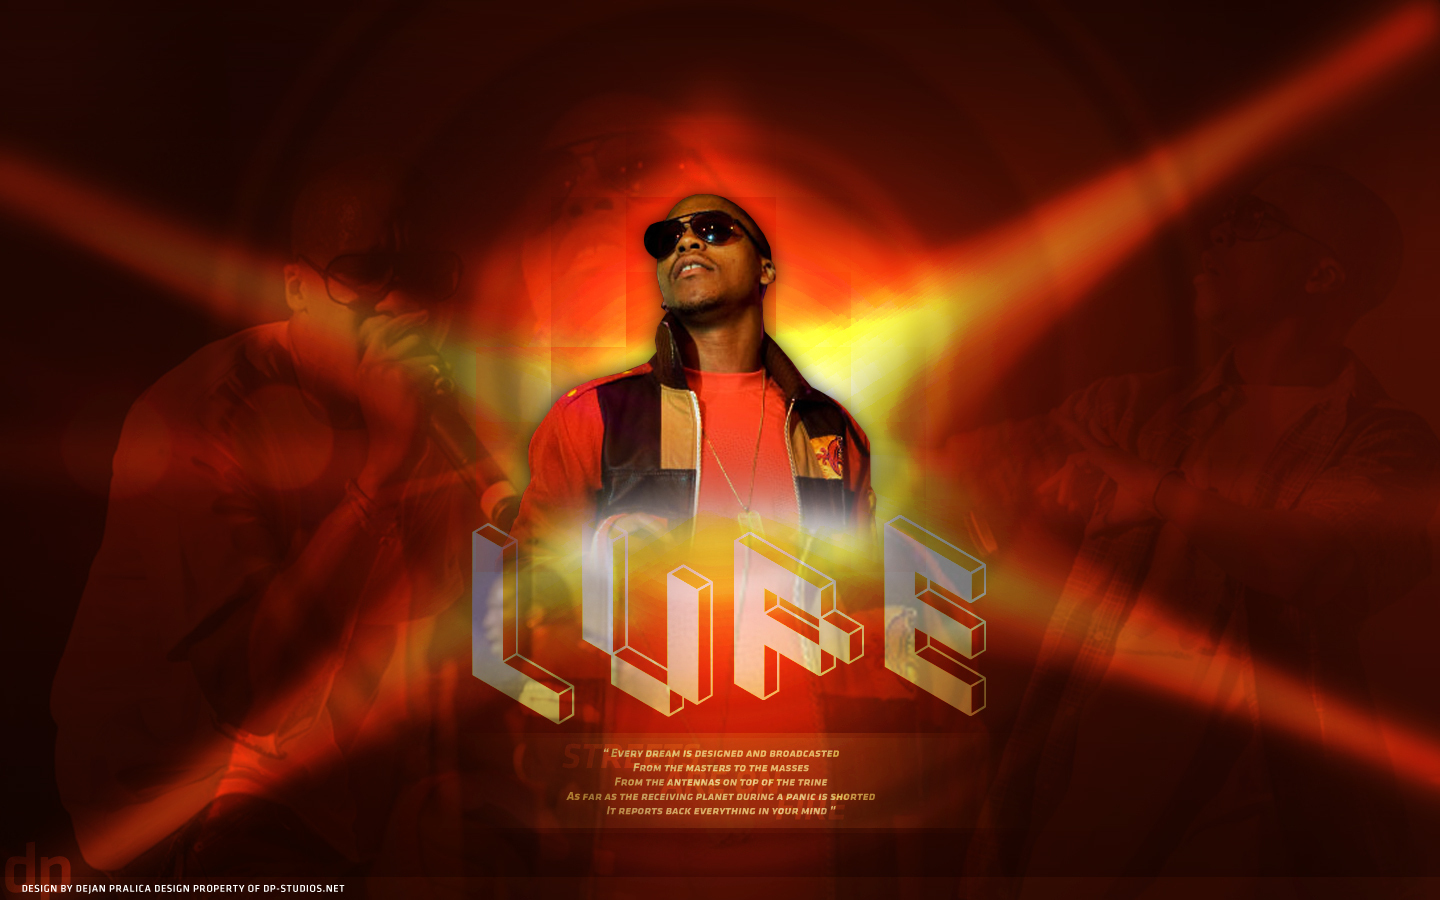 Lupe Fiasco Image HD Wallpaper And Background